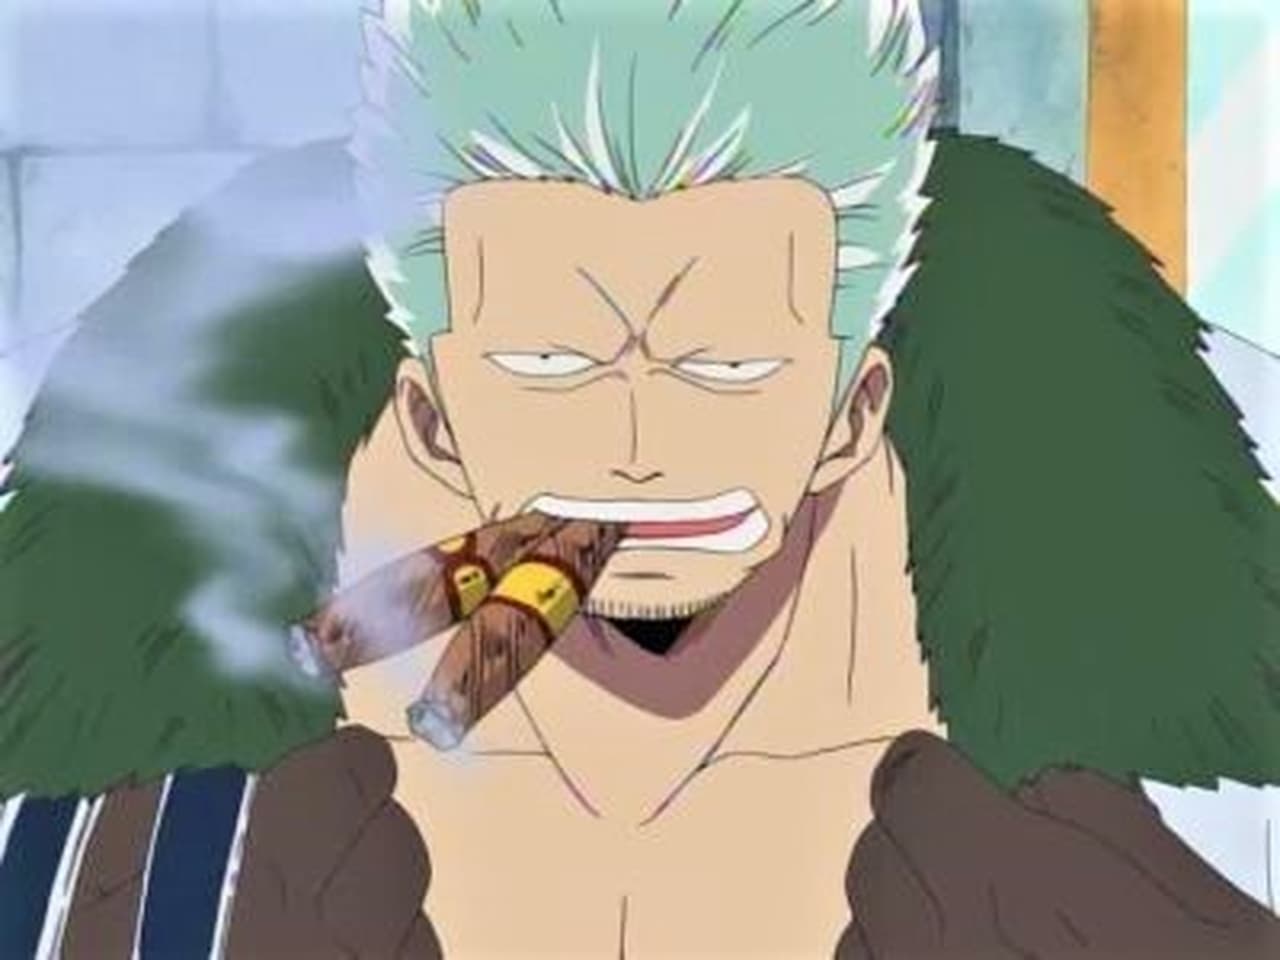 One Piece - Season 1 Episode 48 : The Town of the Beginning and the End! Landfall at Logue Town!